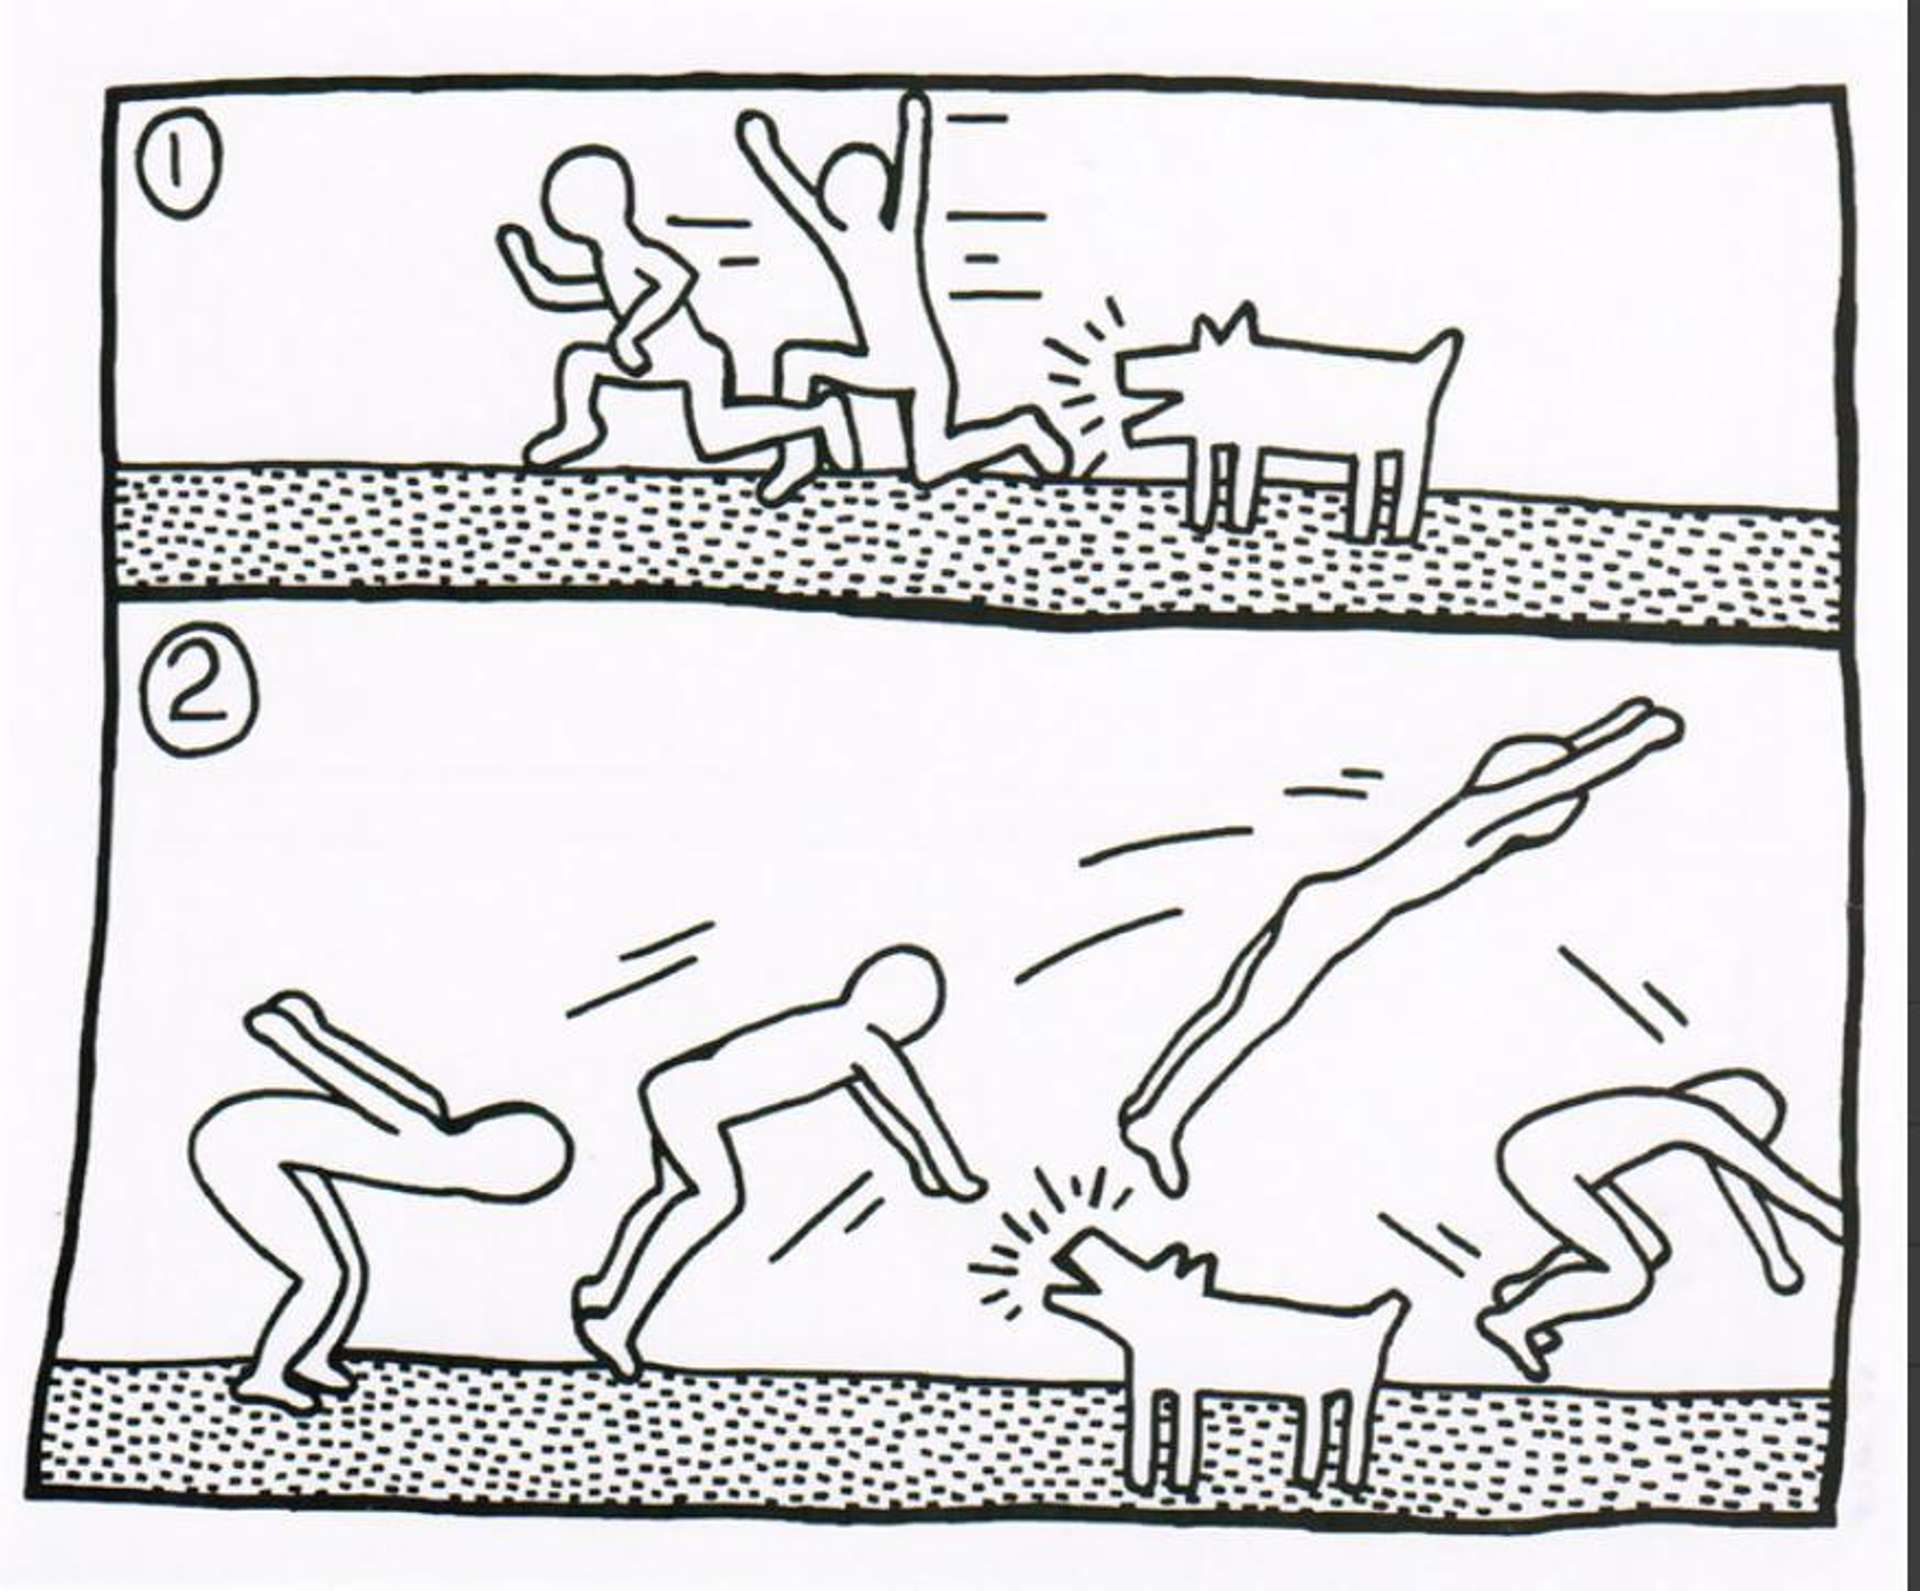 Keith Haring’s The Blueprint Drawings 12. A Pop Art screenprint of a black and white comic strip of various scenes including a barking dog and figures playing games with each other.